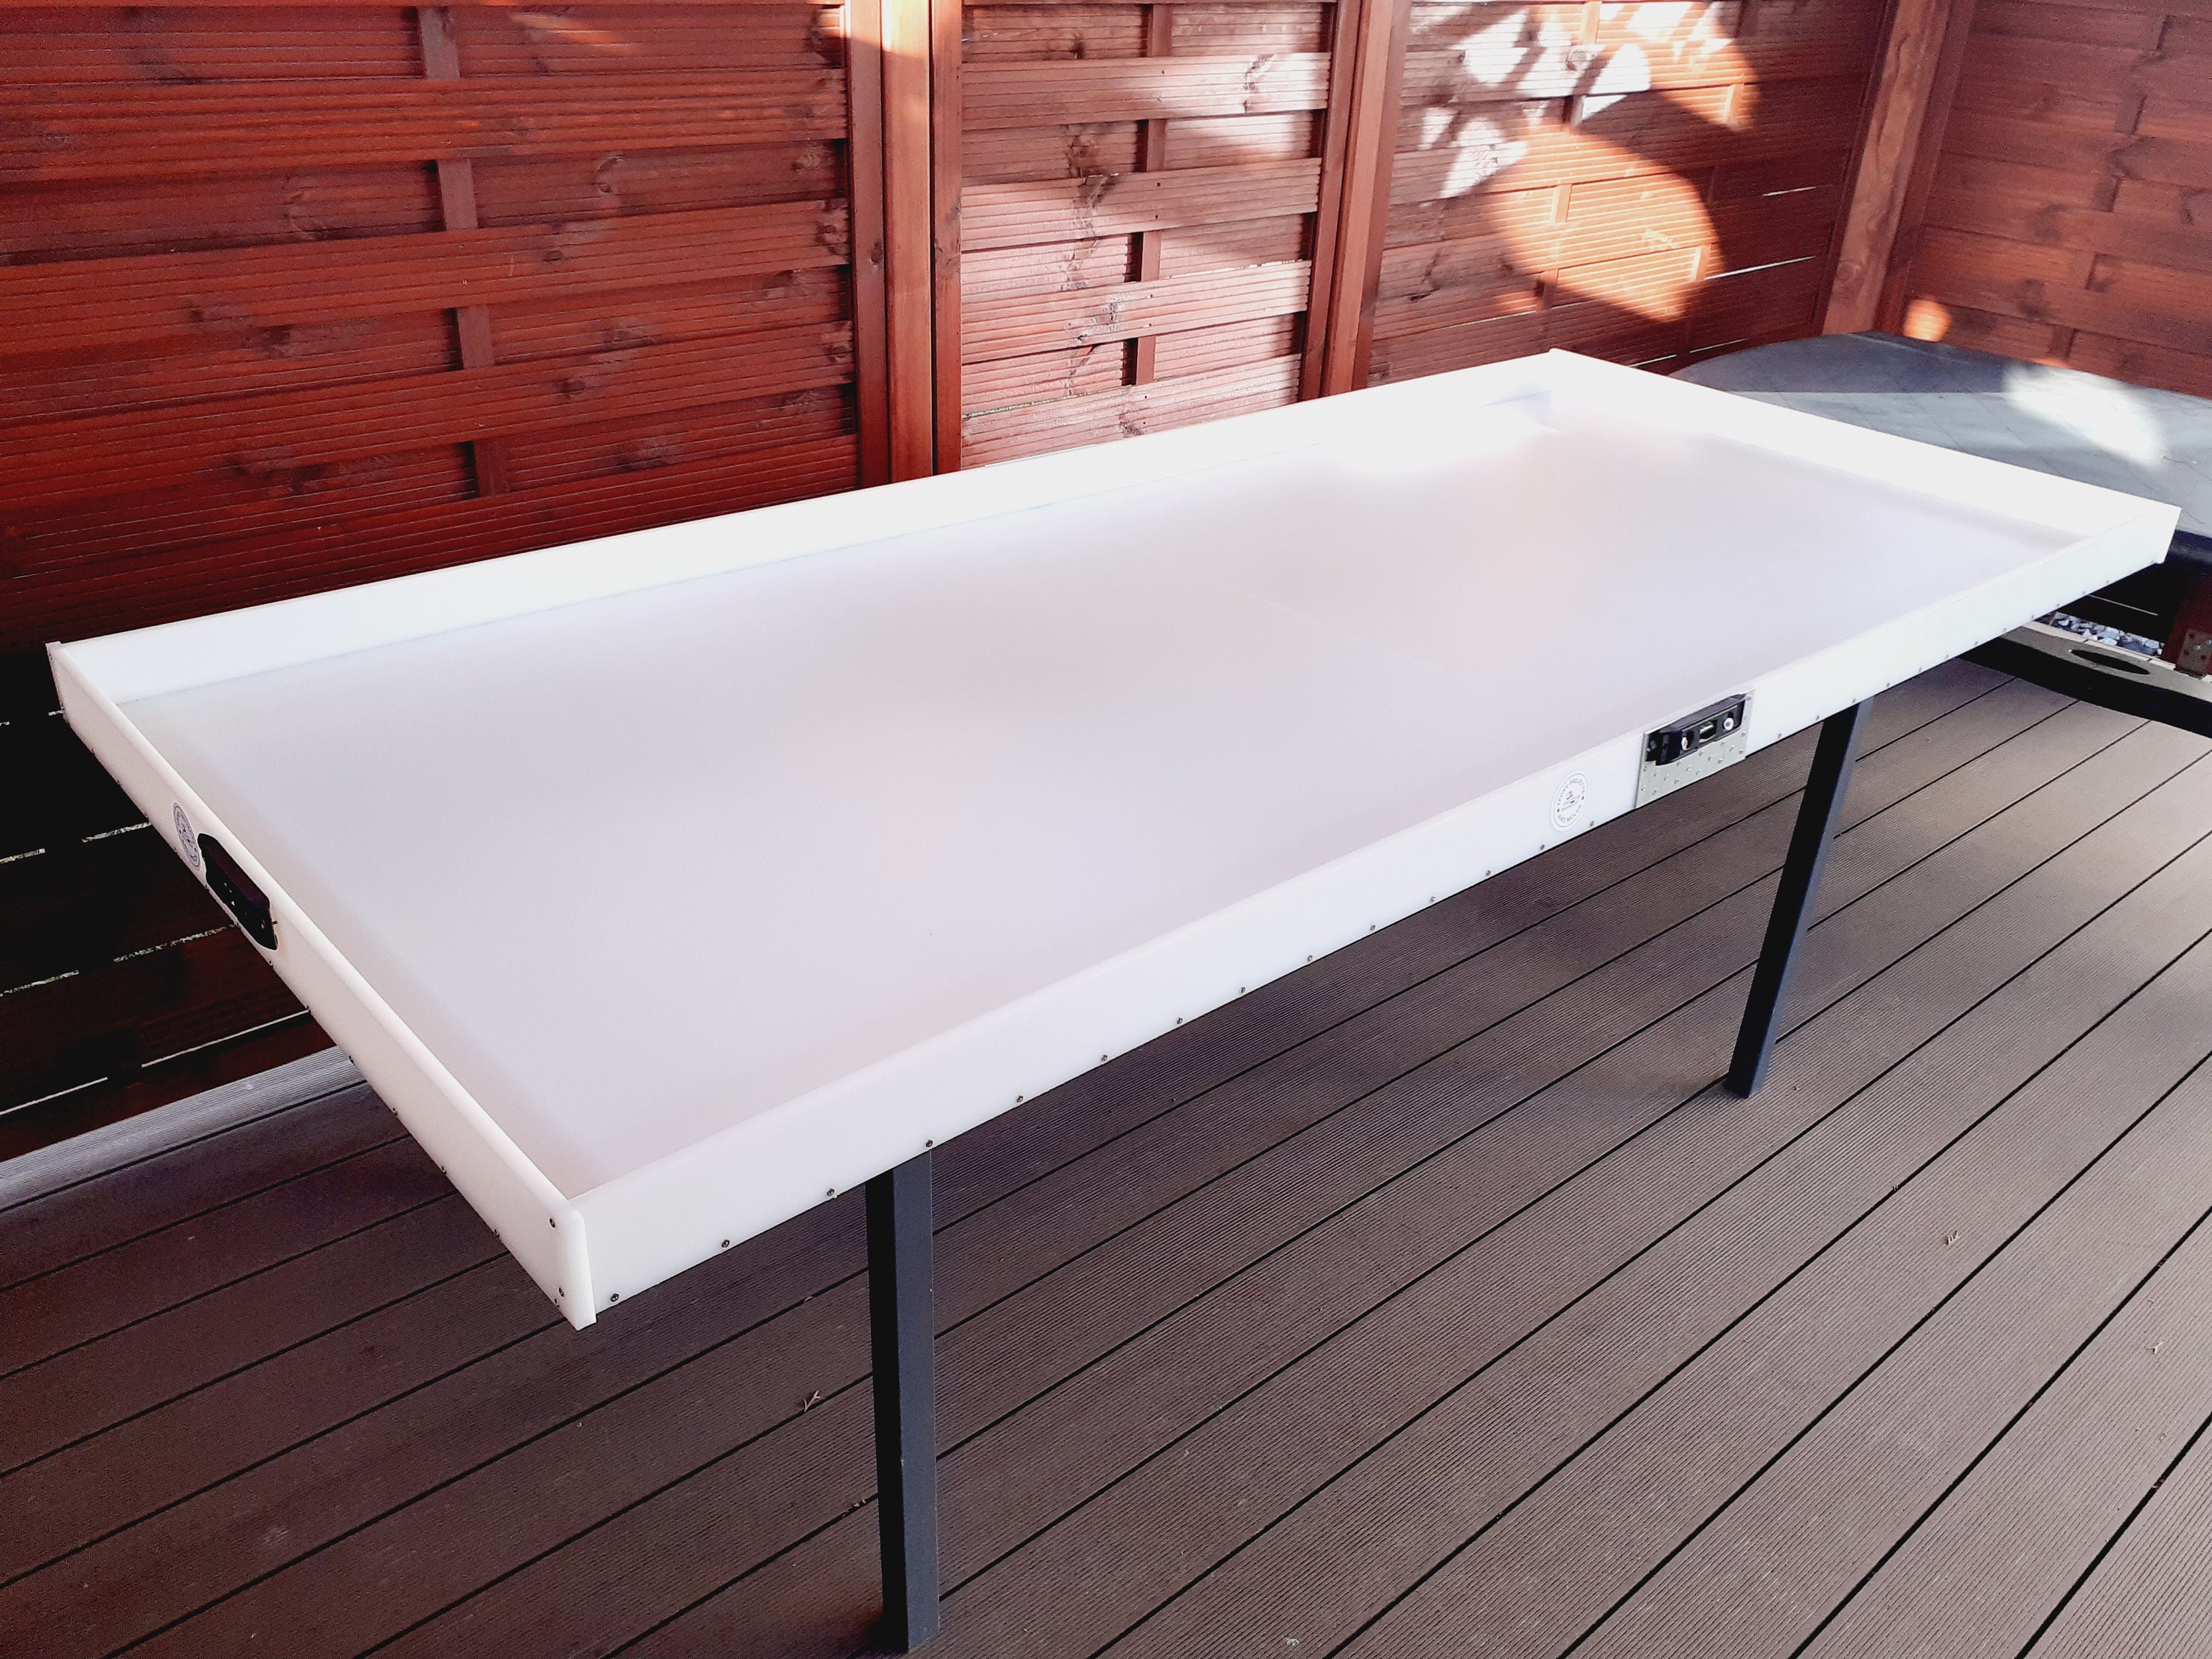 8 Ft 95 X 39 243 Cm X 100 Cm HDPE Pourfection Mold Epoxy Huge Big Dinning Table  Mould by 3,4 Ft in Woodworker Gift Casting Large River 